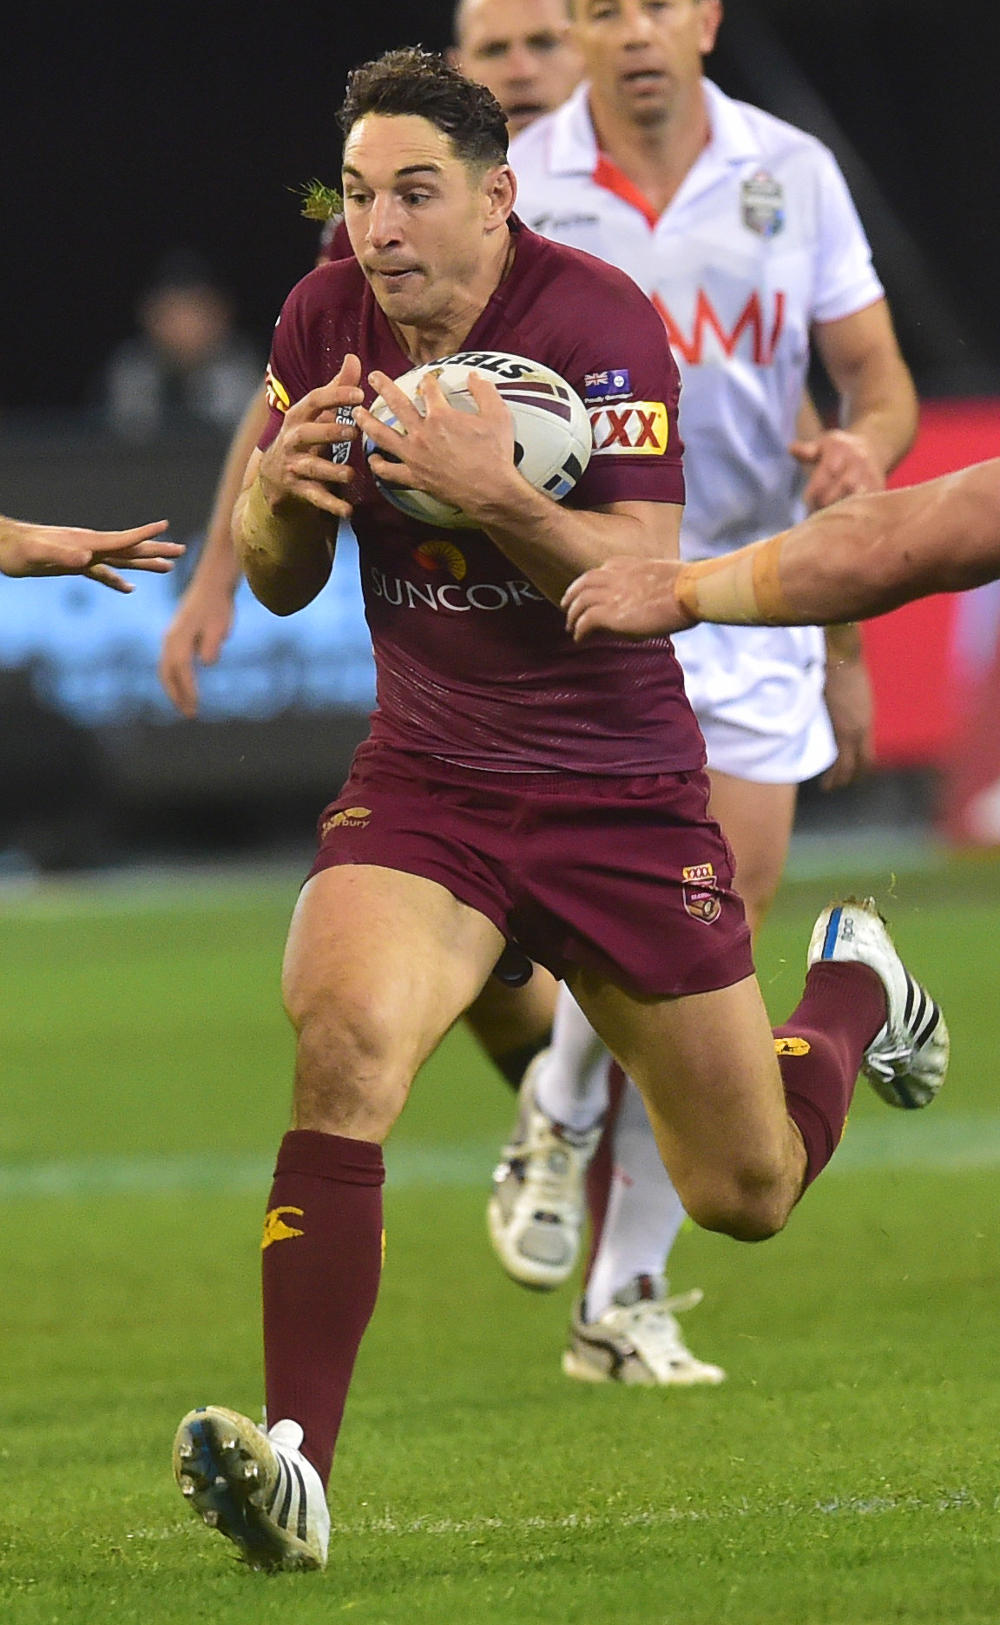 Billy Slater runs the ball for the Maroons in State of Origin